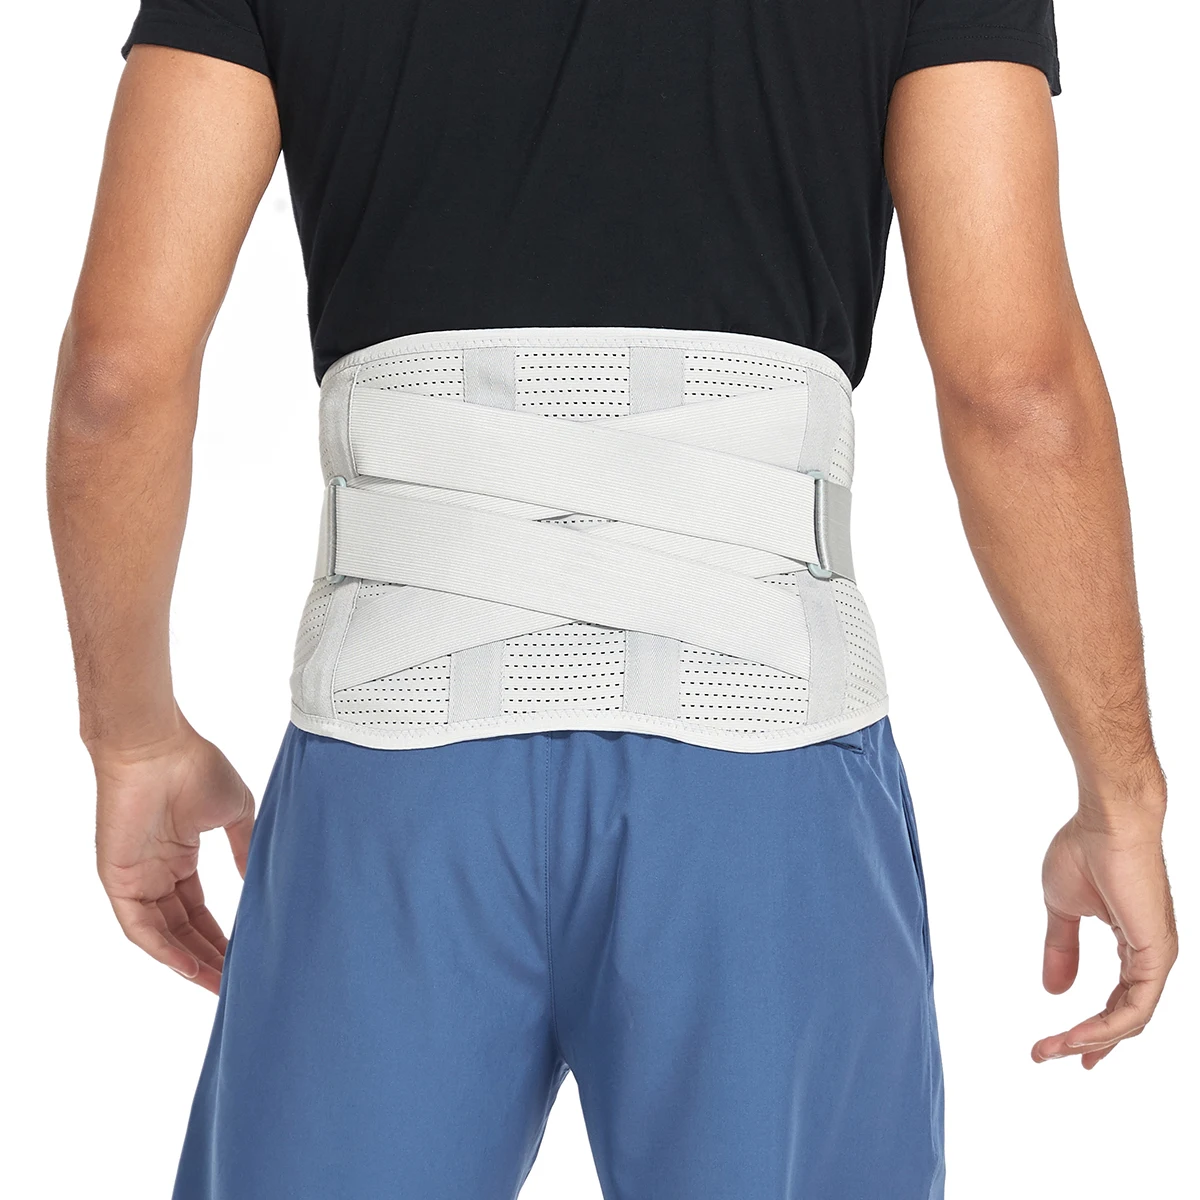 Back Brace for Men Breathable Waist Shapers Lumbar Lower Back Support Belt Herniated Disc Back Pain Relief Heavy Lifting effective rehabilitation equipment adjustable medical orthosis lumbar orthopedic back support jewett hyperextension brace